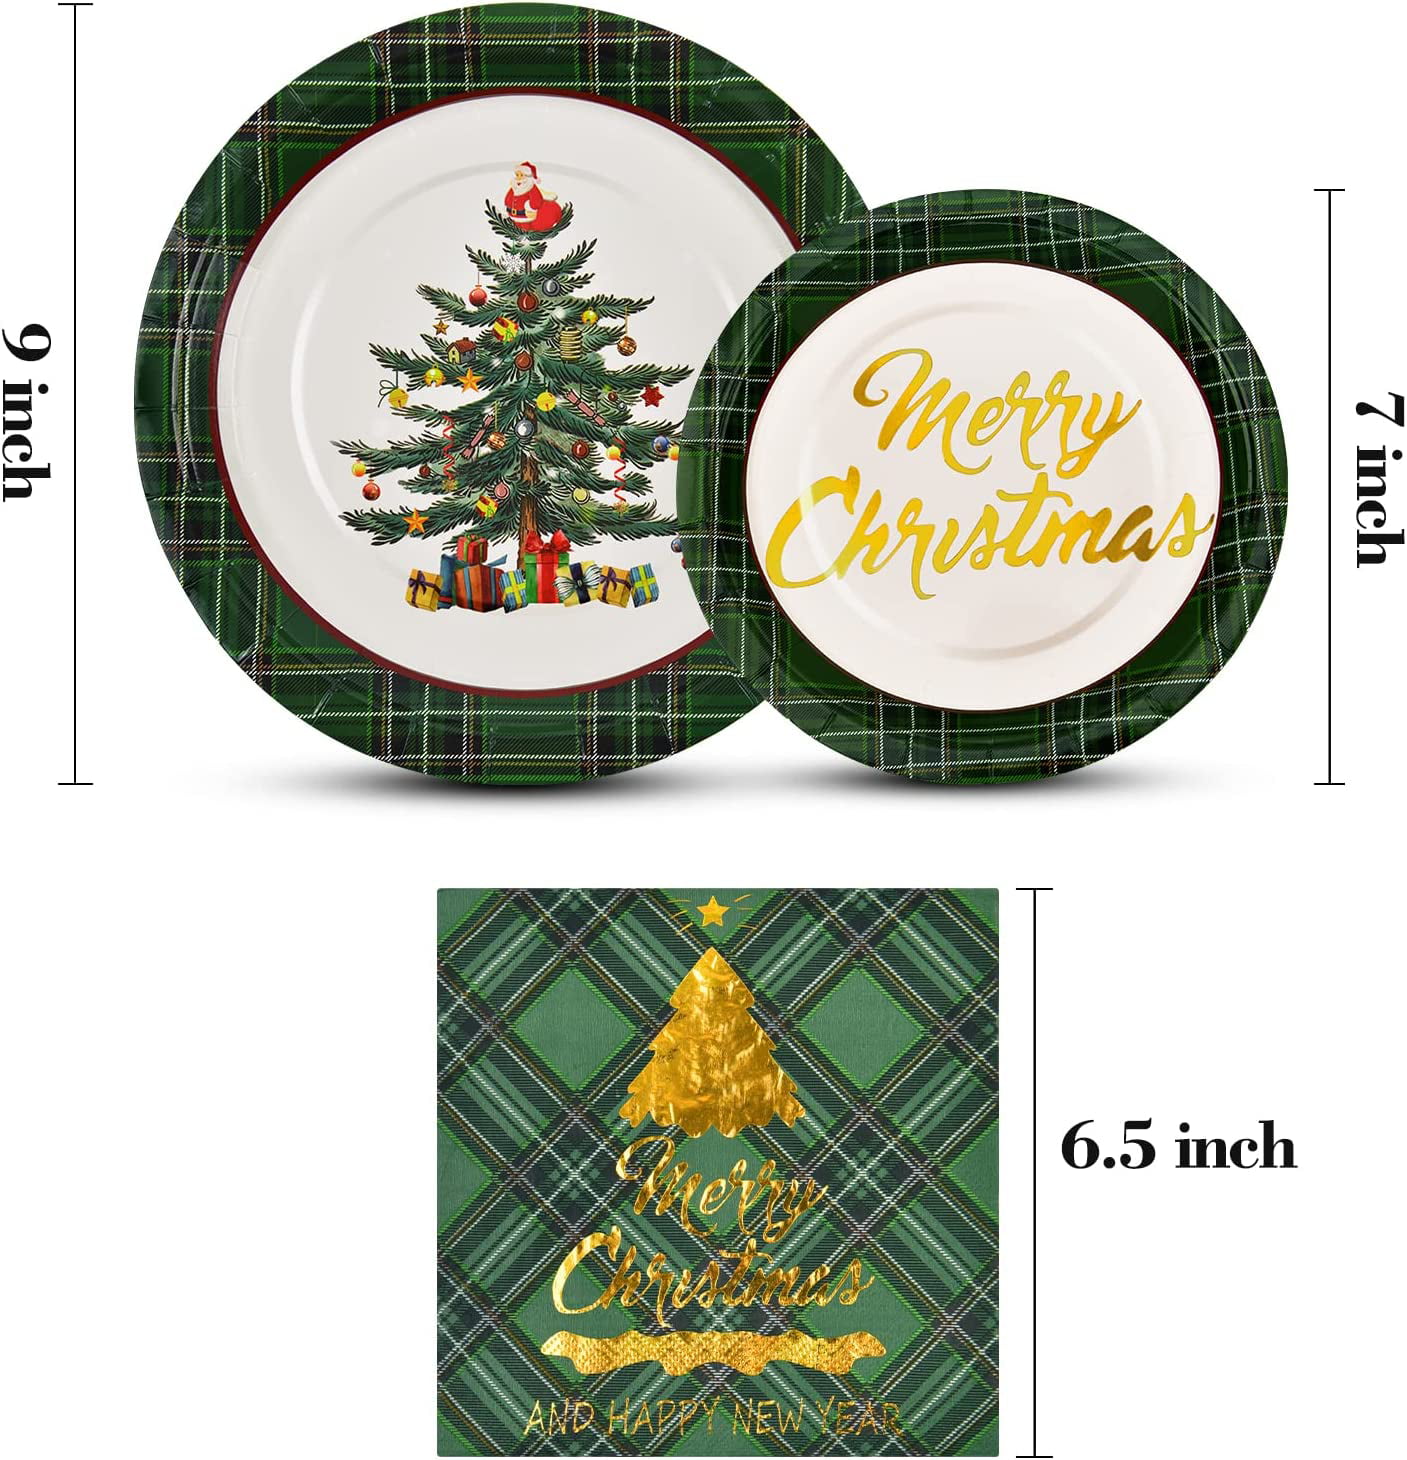 DECORLIFE Large Gnome Paper Plates Serves 24, 10.25 and 8 Disposable  Christmas Paper Plates and Napkins Sets, Buffalo Plaid Napkins, Forks  Included